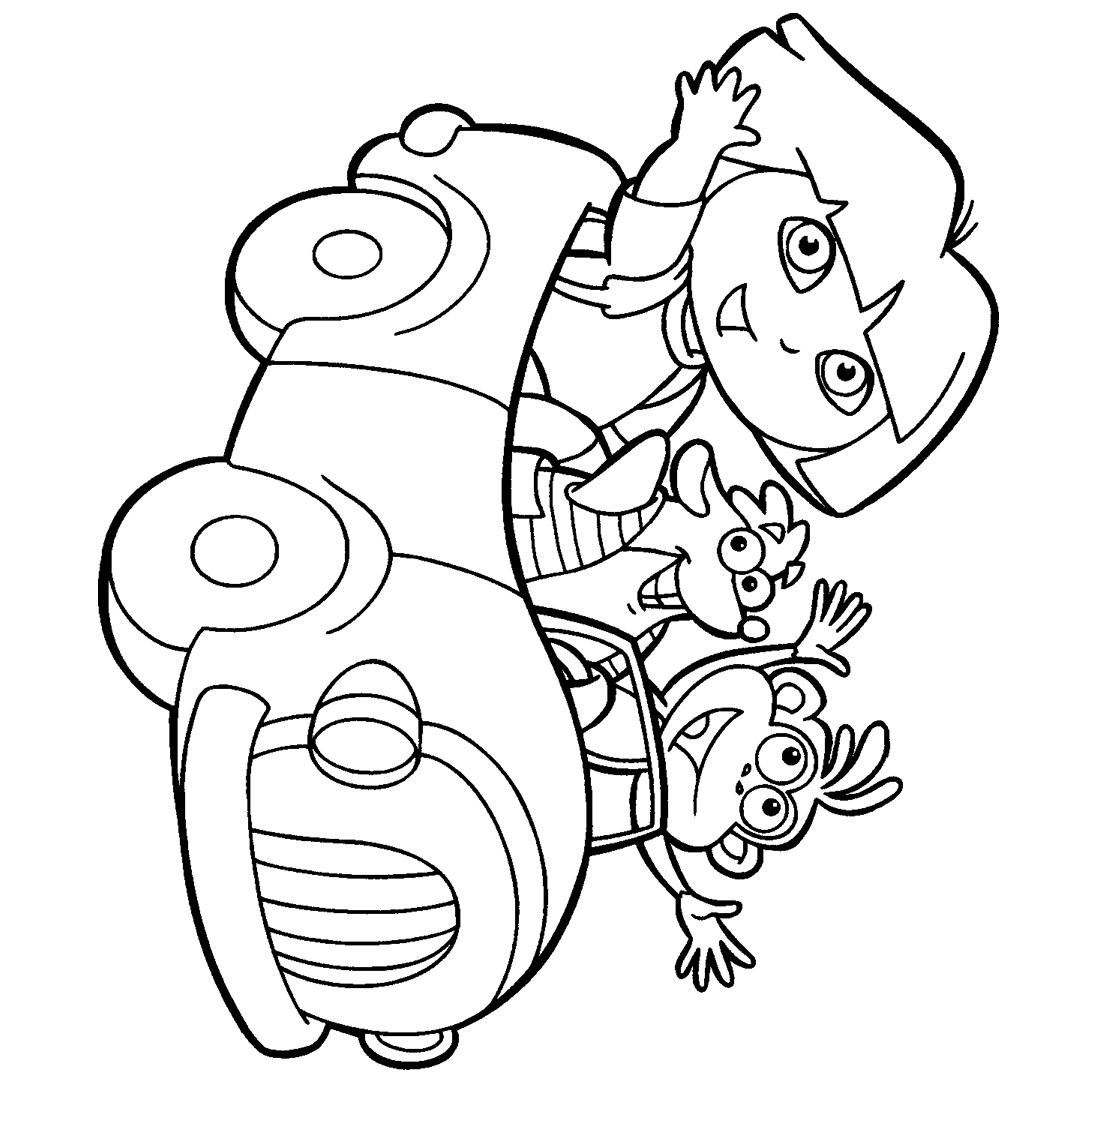 Coloring Books For Toddlers
 Printable coloring pages for kids